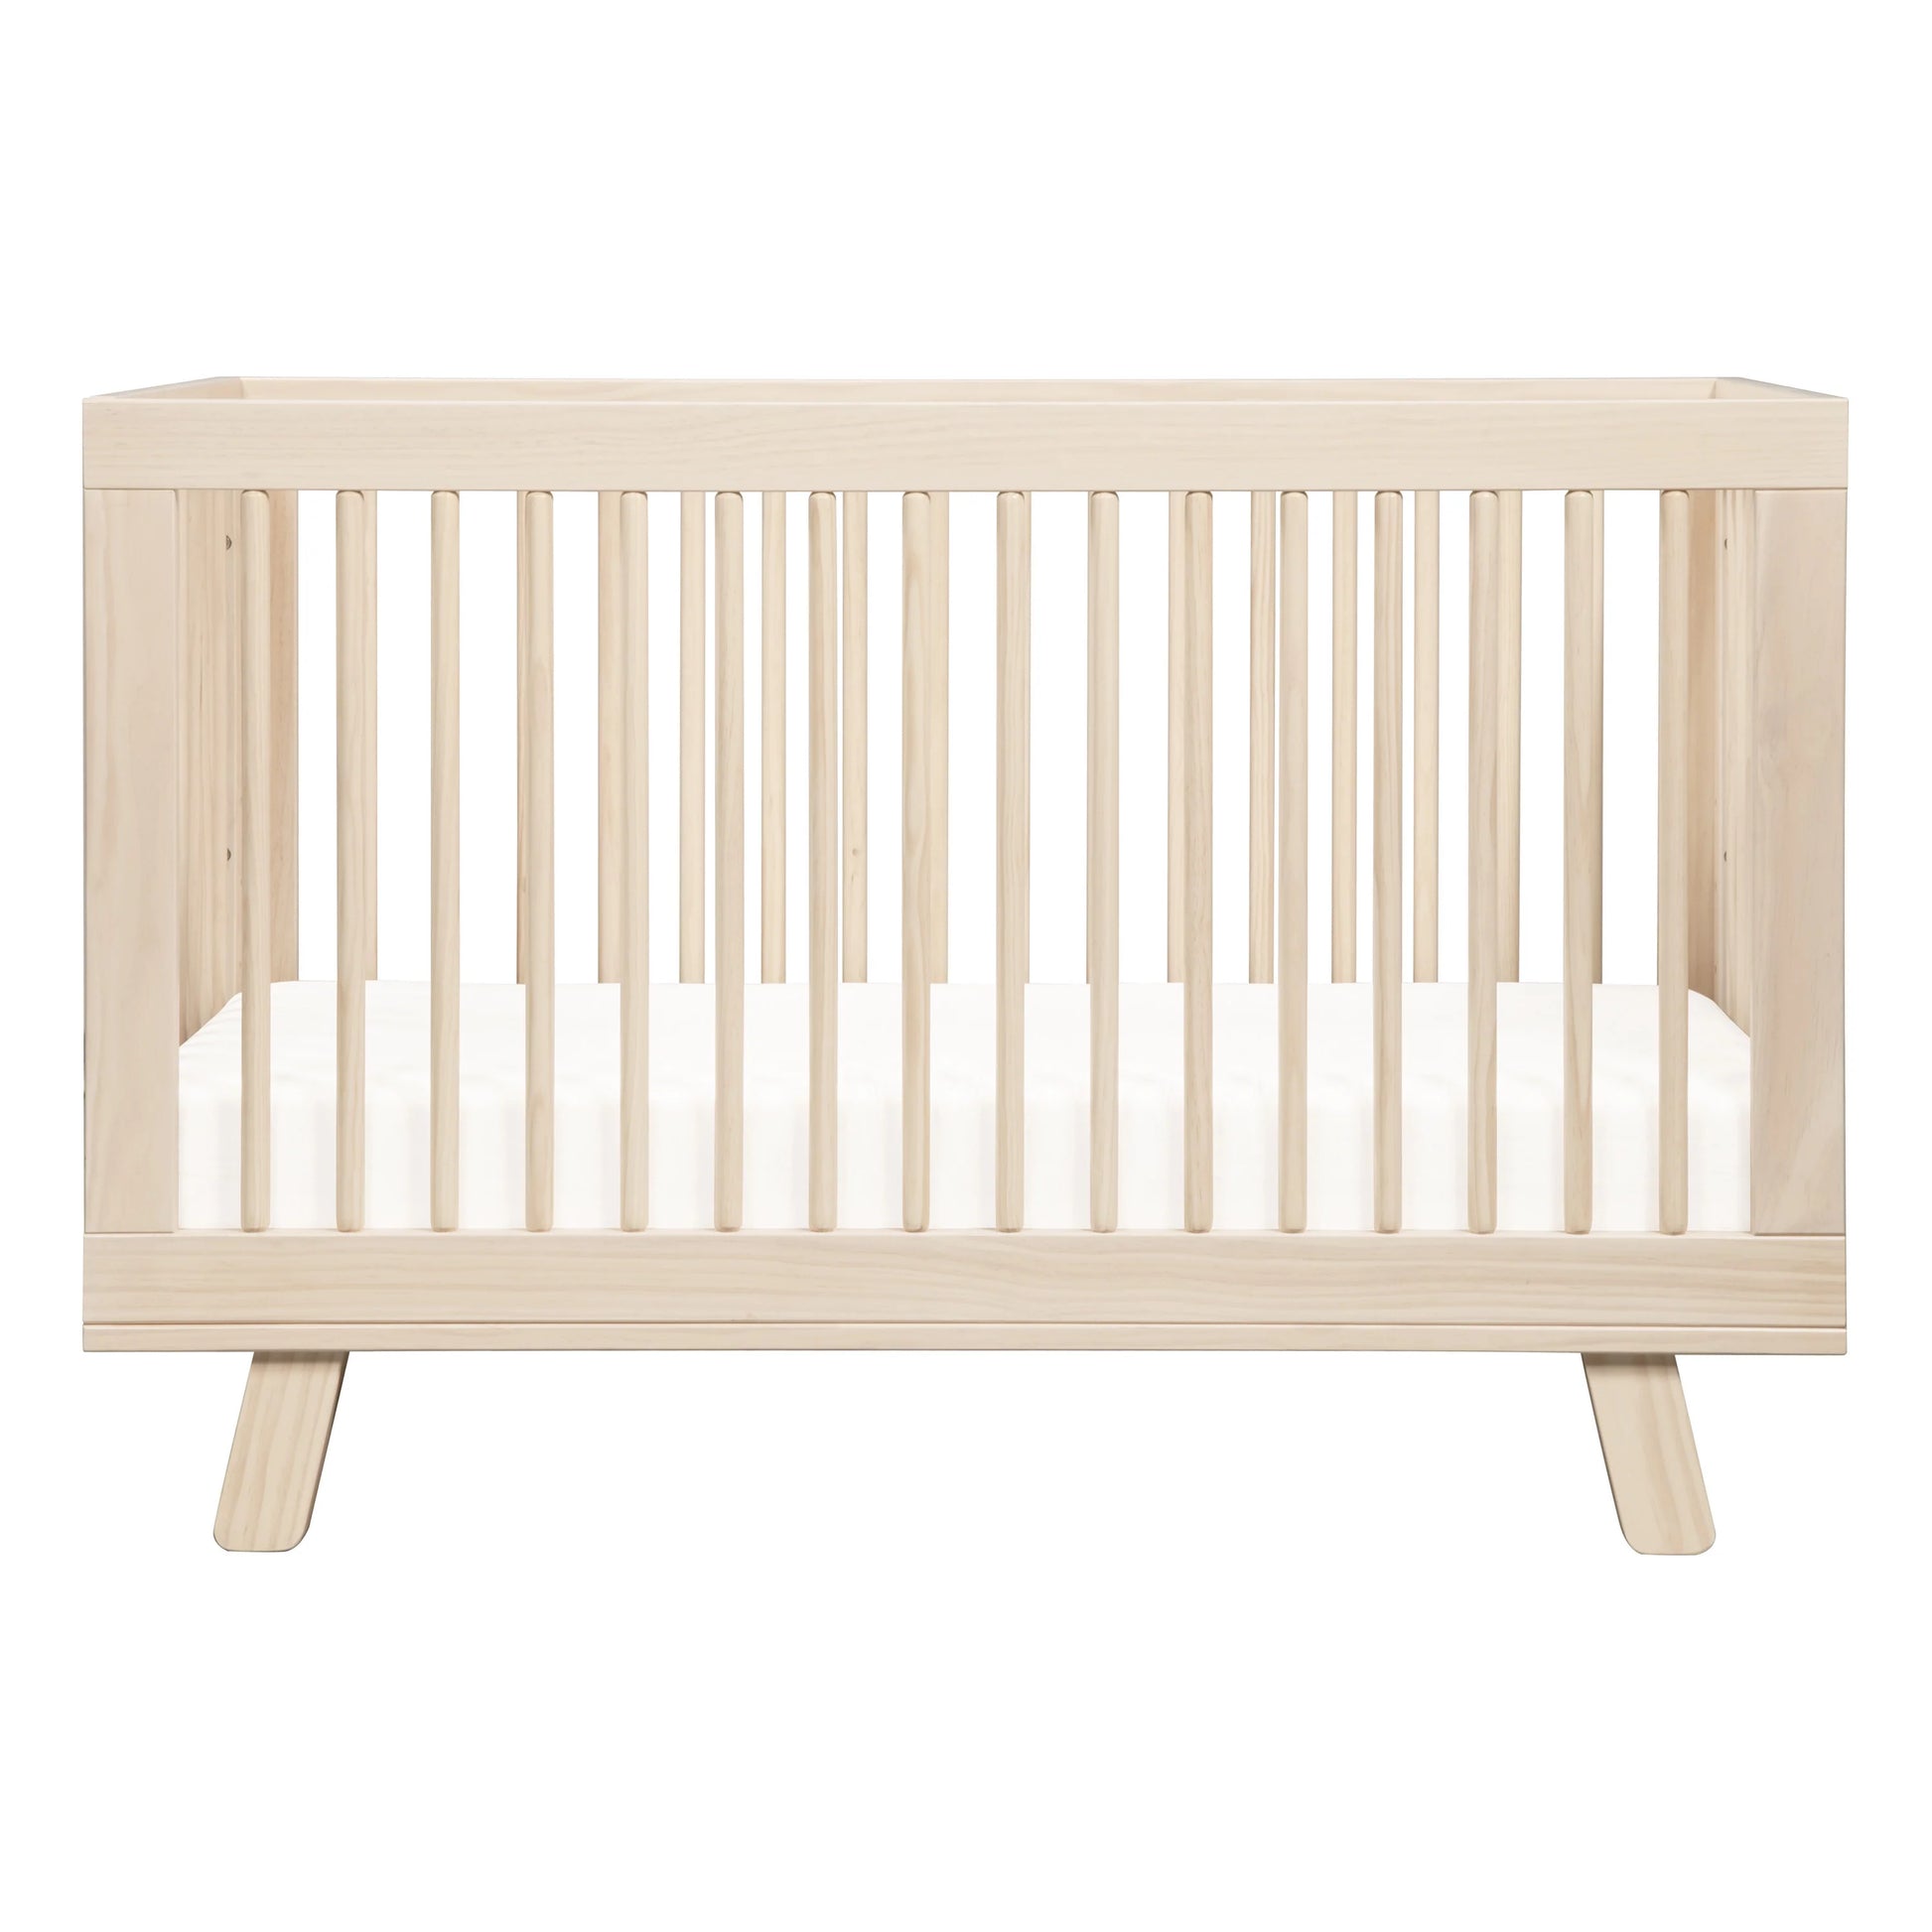 Babyletto Hudson 3-in-1 Convertible Crib with Toddler Bed Conversion Kit - washed natural